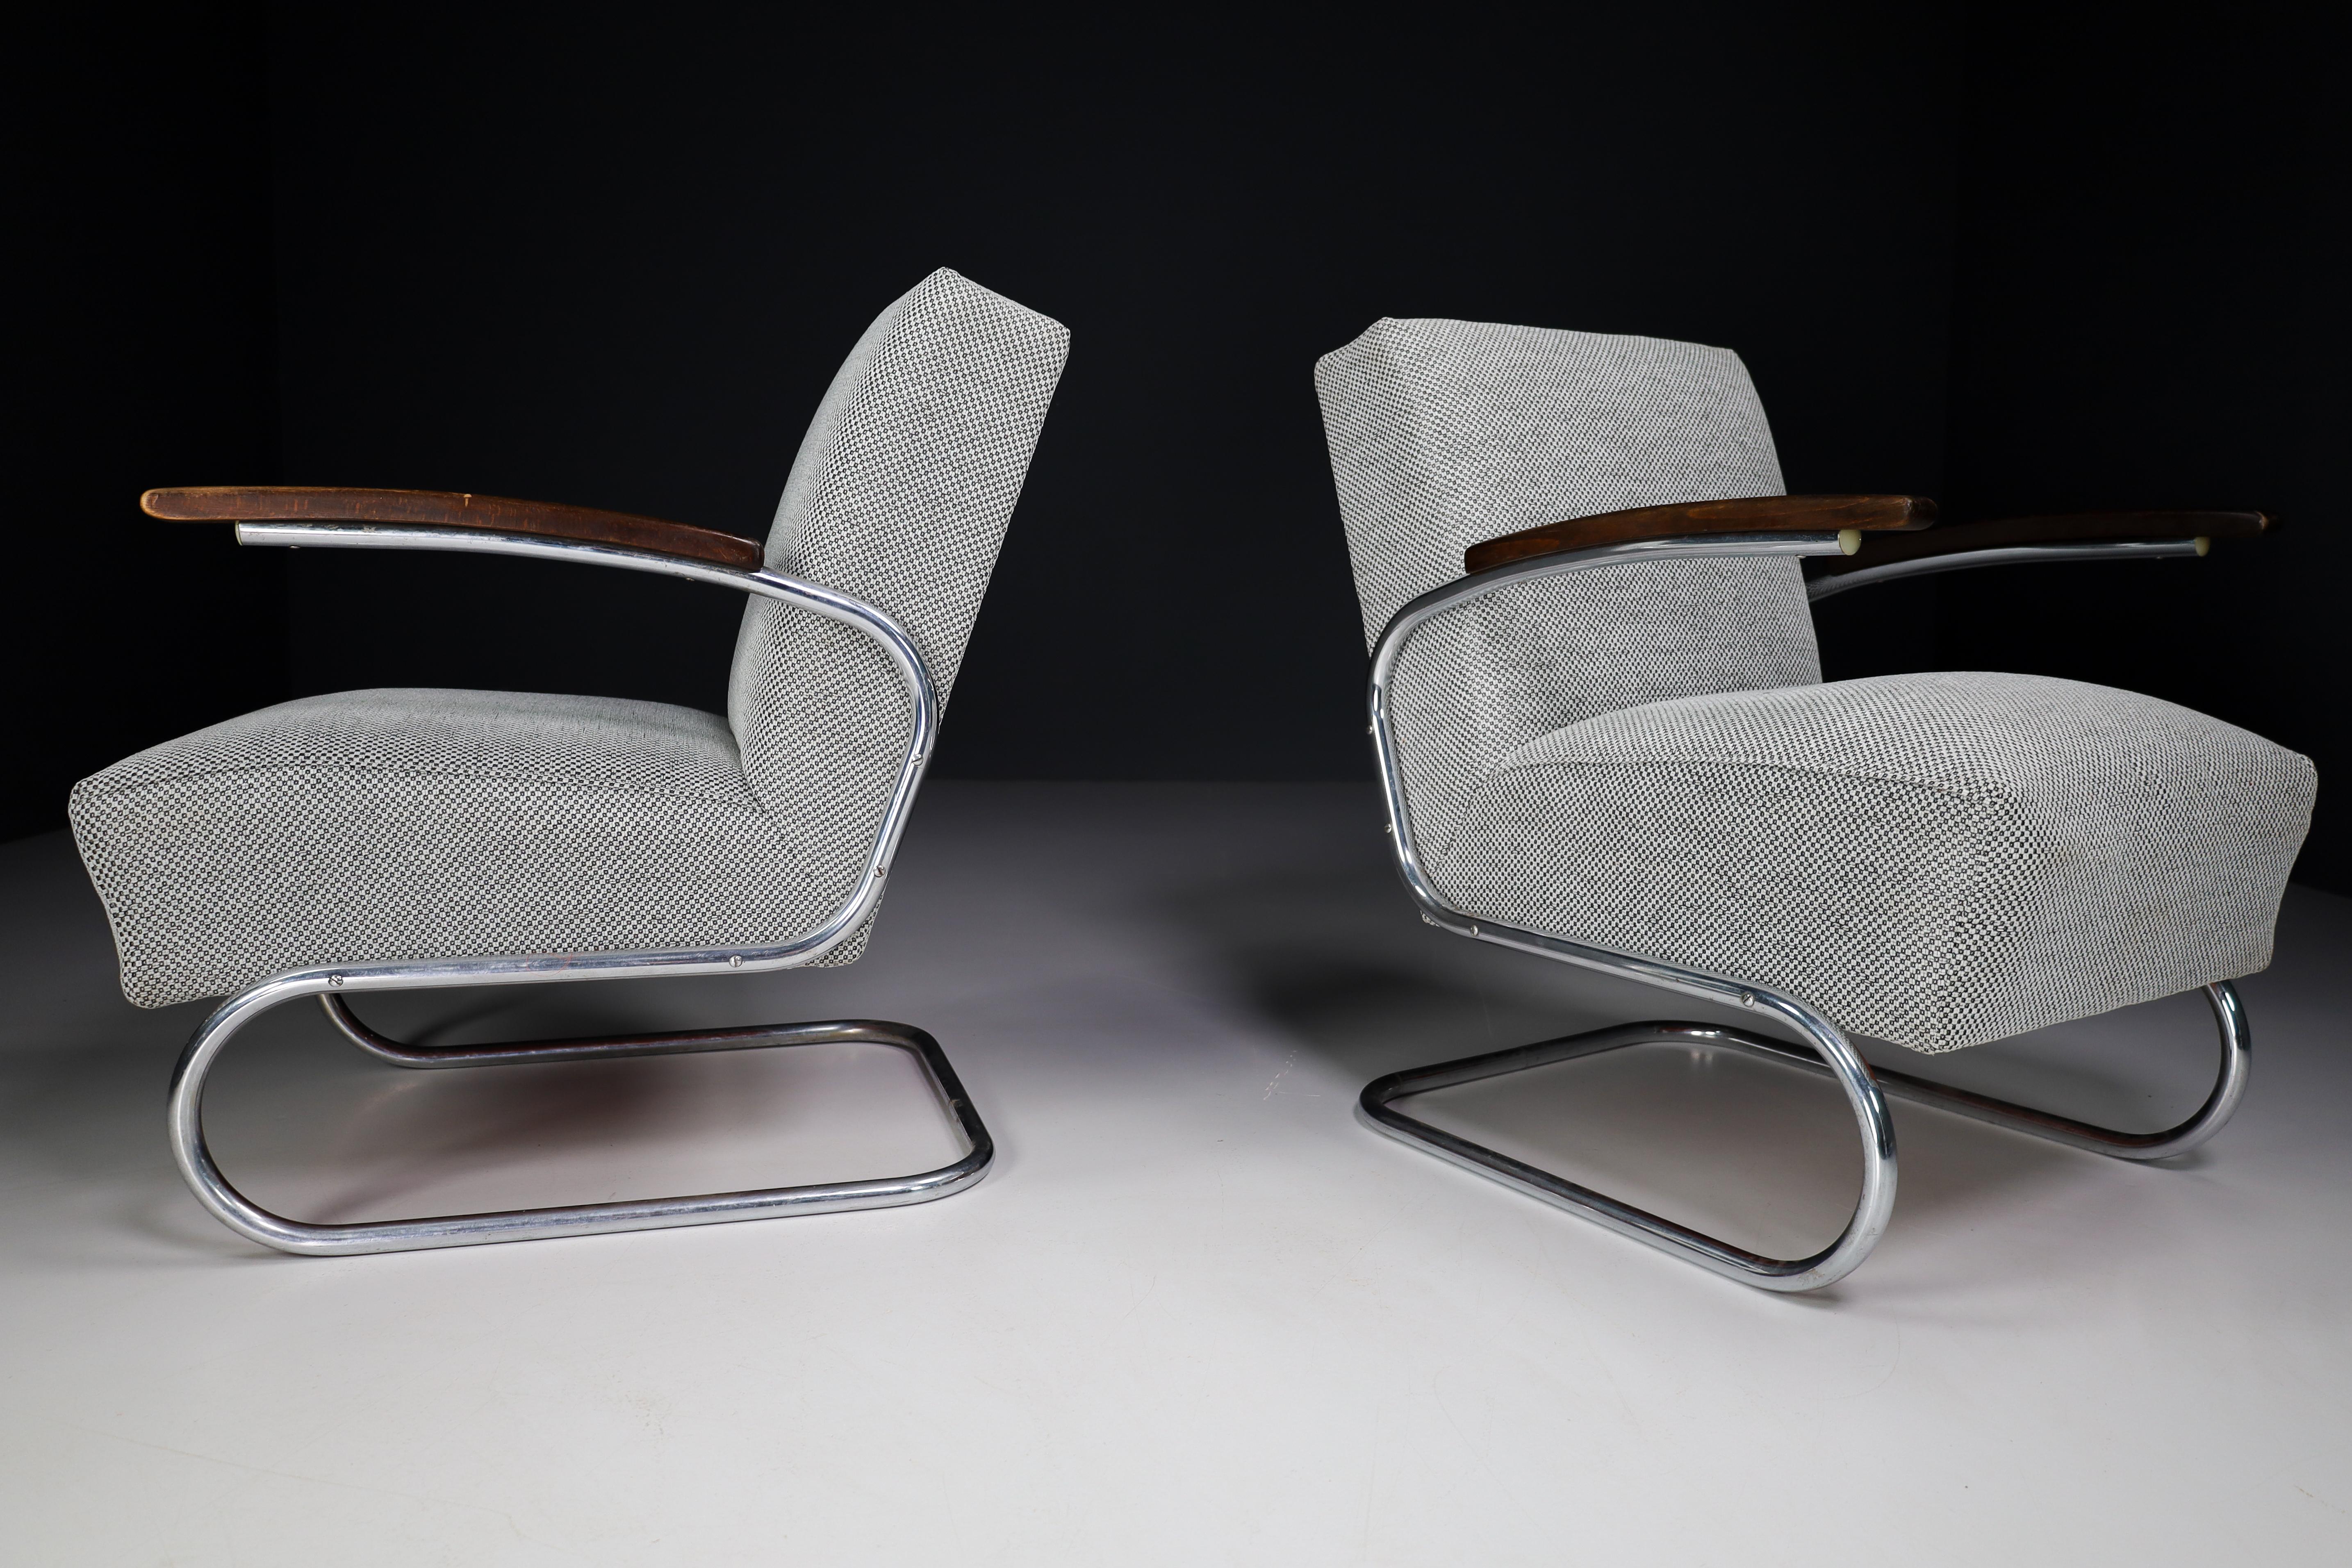 Model S411 armchairs by Thonet circa 1930s mid-century Bauhaus period. These cantilever armchairs are typical for the German and Eastern Europe Bauhaus era. These armchairs has a tubular steel frame and is re-upholstered with a grey fabric. The